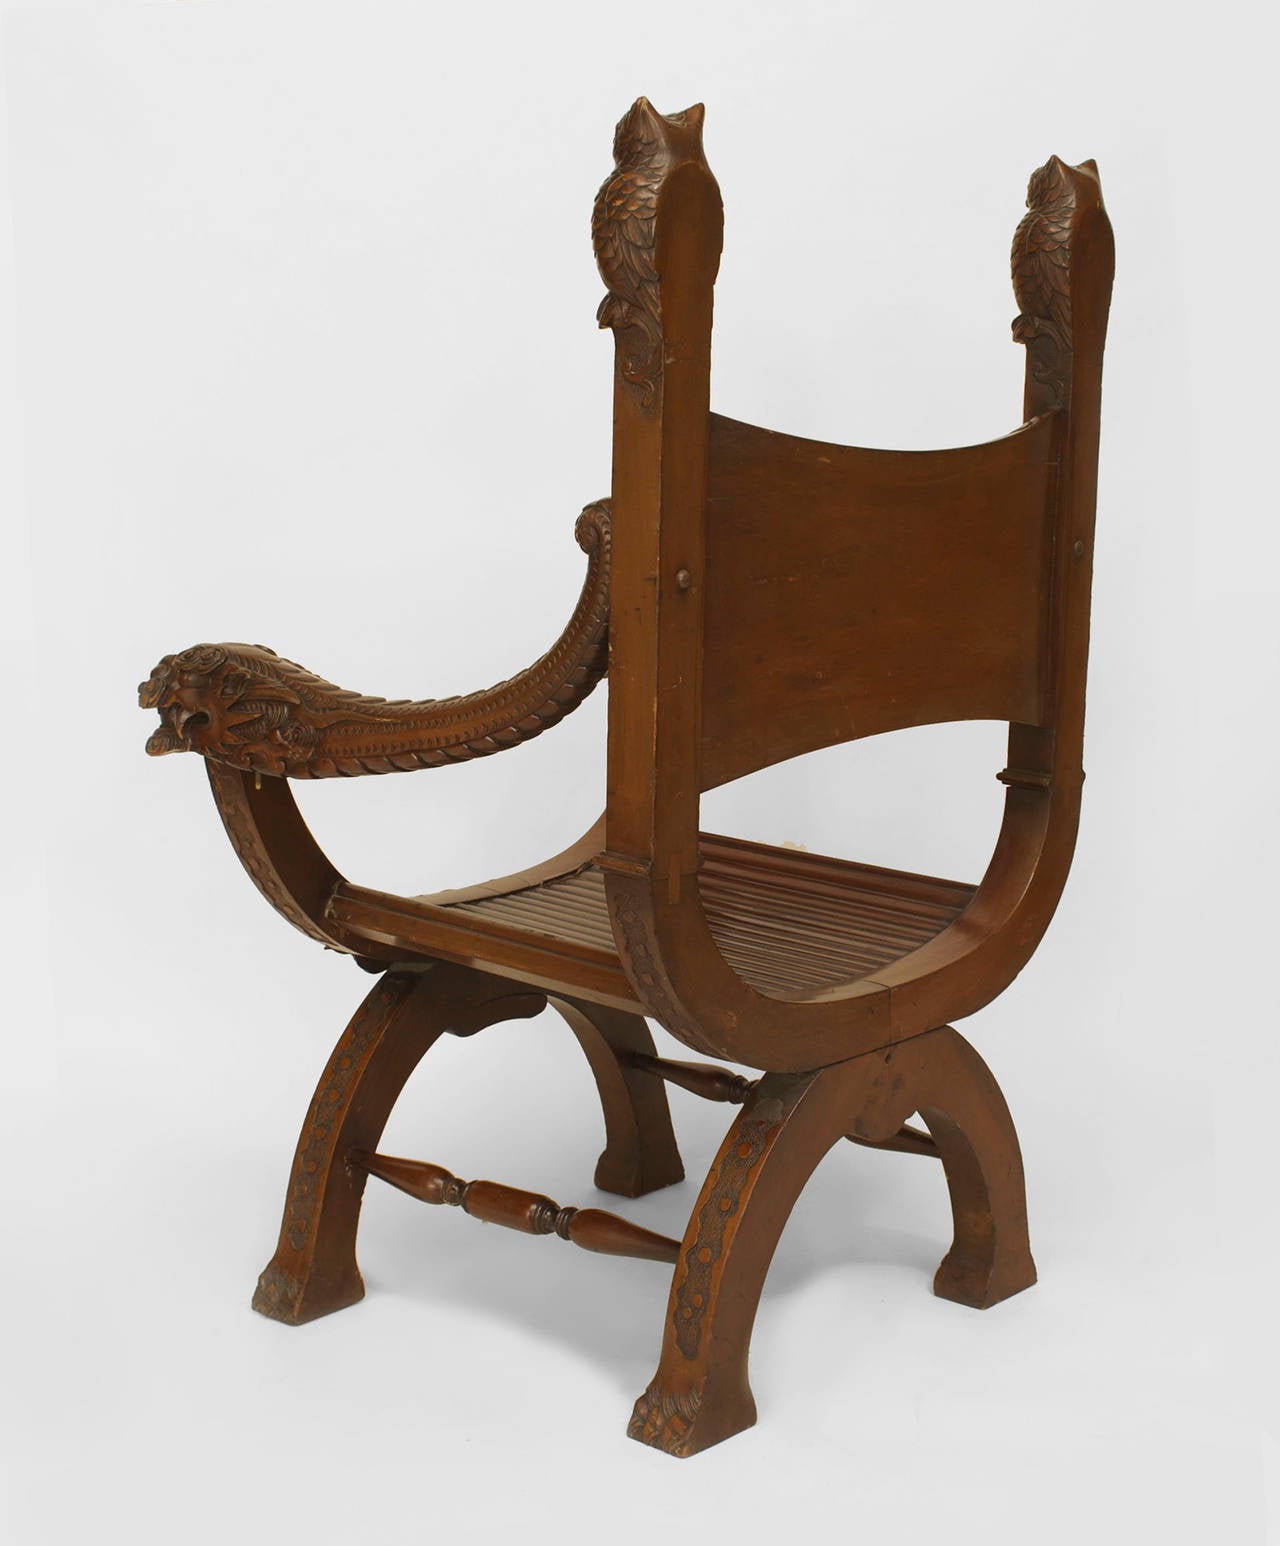 Asian Japanese (Early 20th Century) mahogany arm chair with a slat design saddle form seat and a carved back panel with owl finials and dragon arms.
